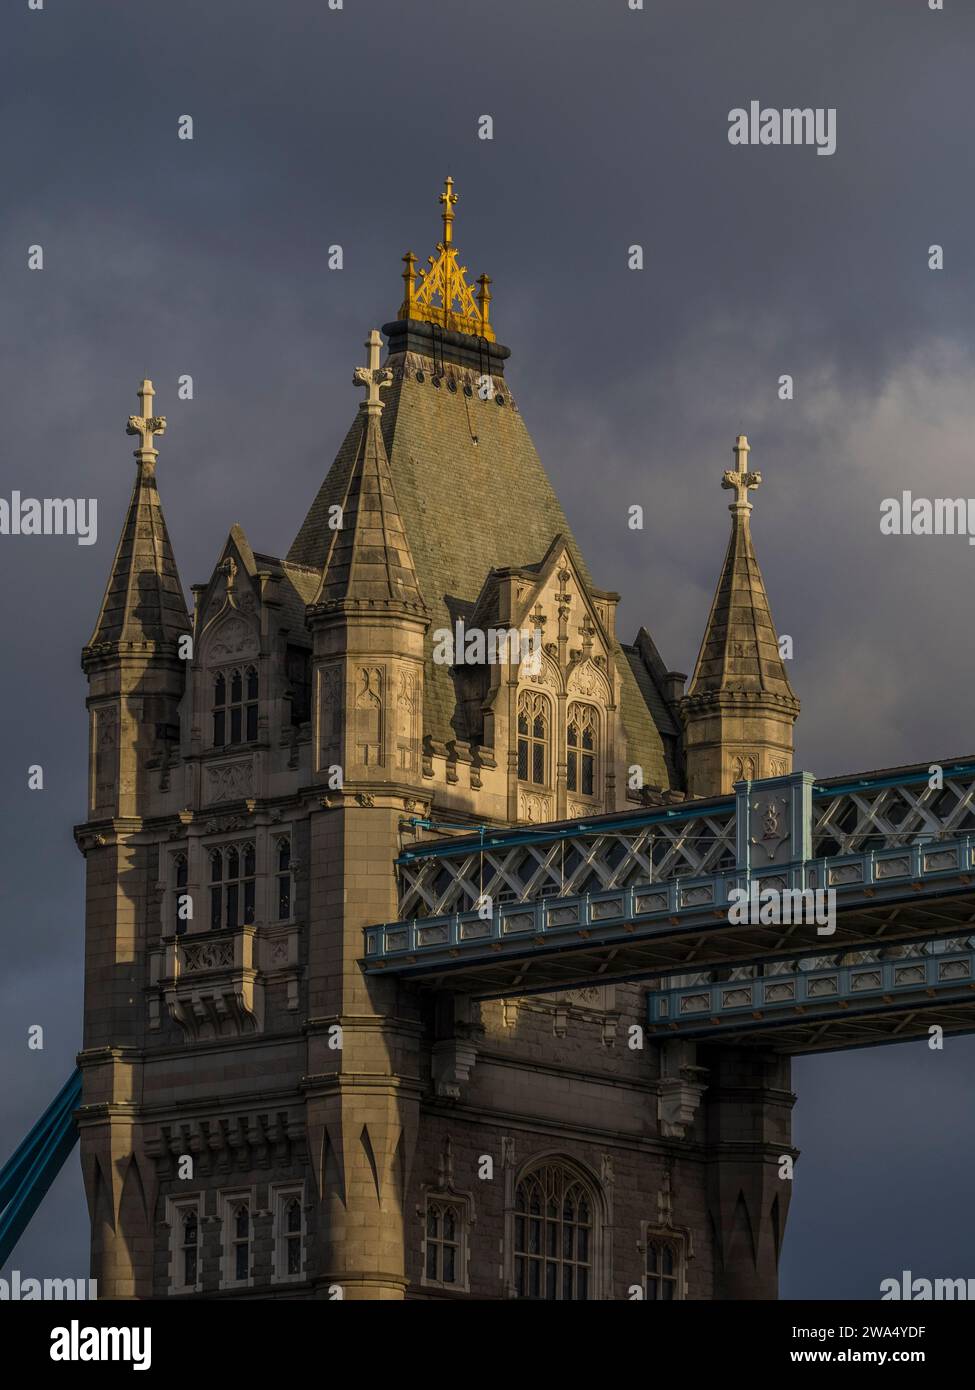 Tower of the Tower of London, Dark Winter Storm Clouds, River Thames, London, England, UK, GB. Stock Photo